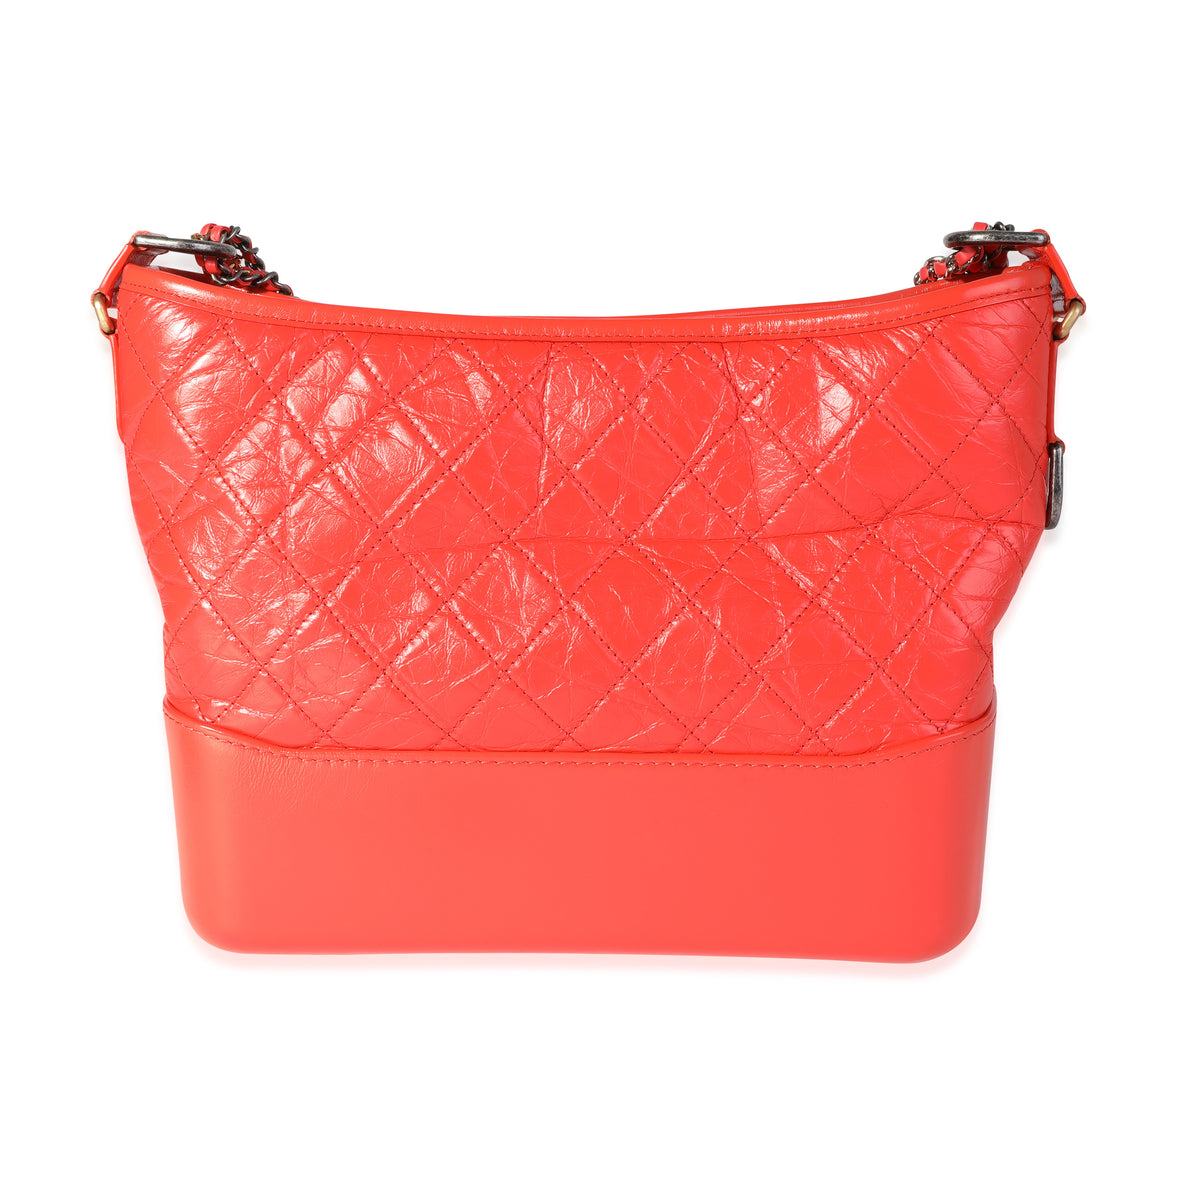 Chanel Orange Quilted Aged Calfskin Large Gabrielle Hobo